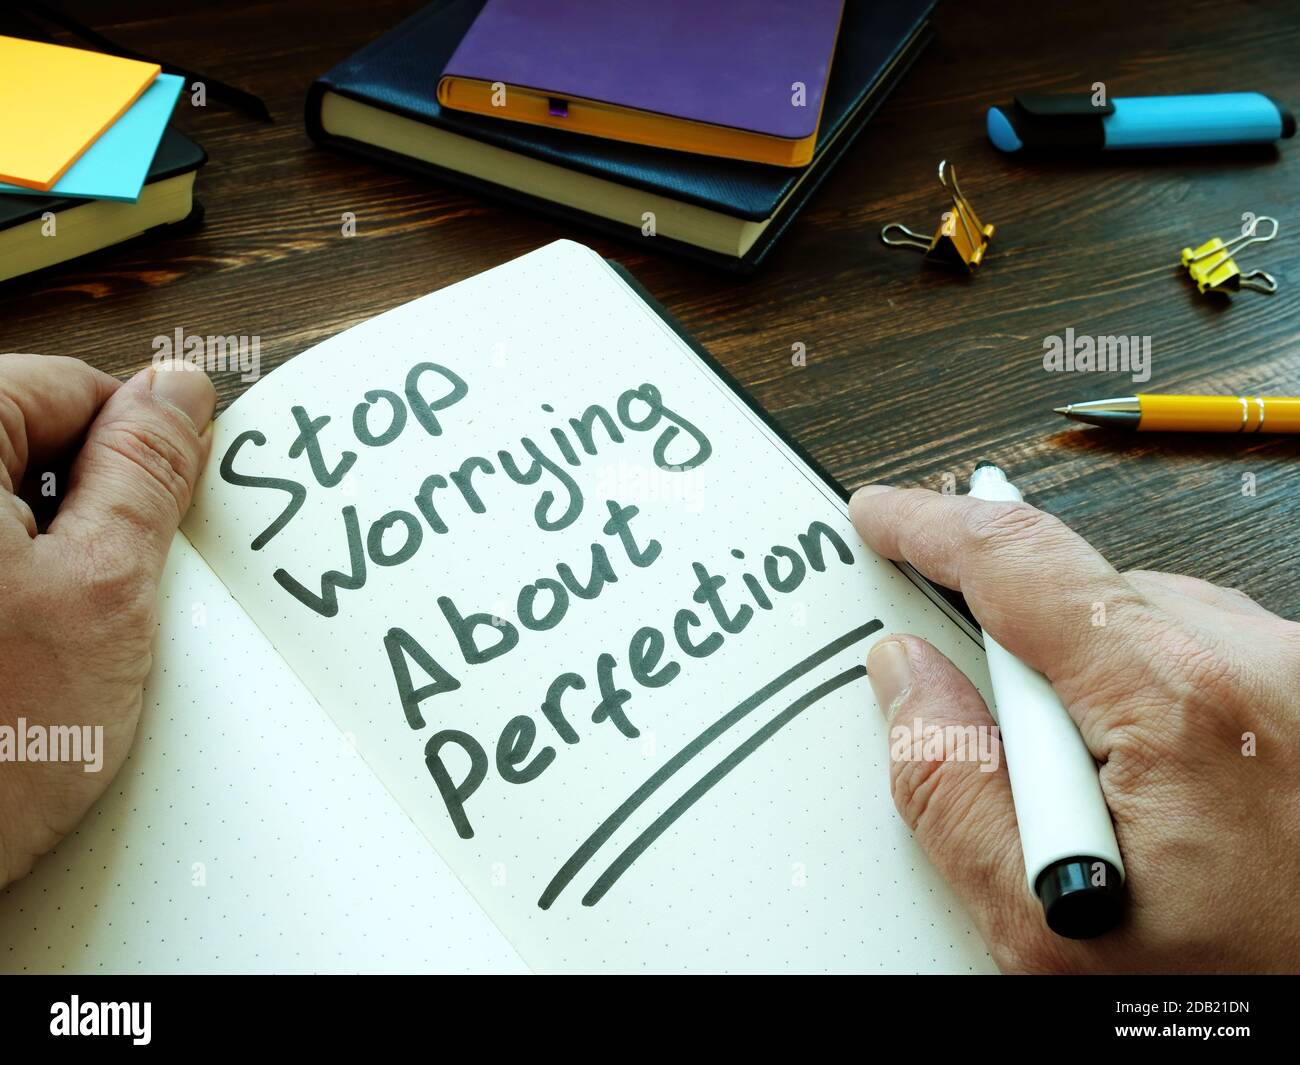 Stop Worrying About Perfection the man wrote. Stock Photo